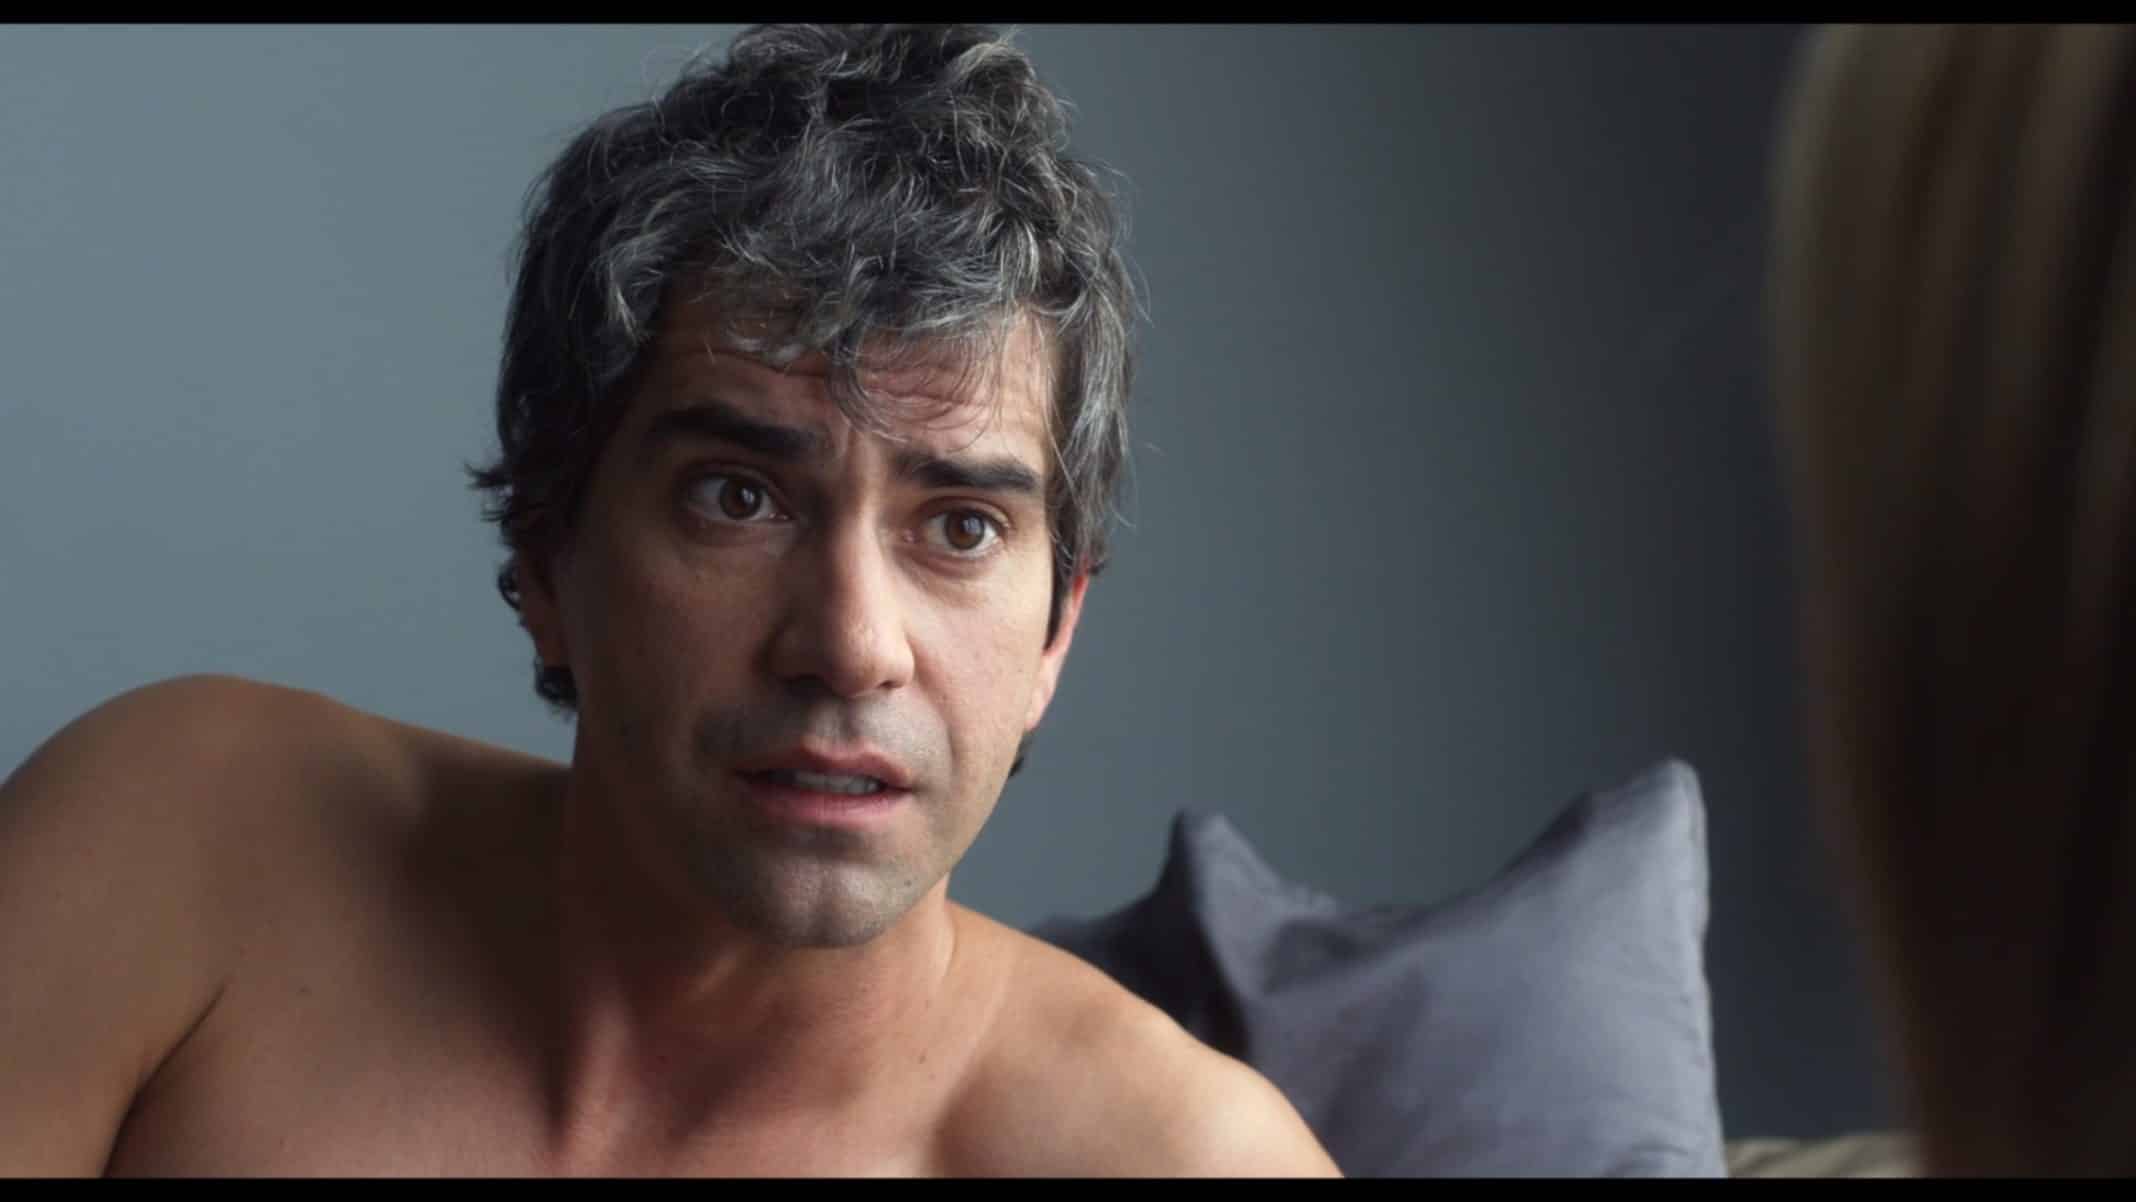 Benjamin (Hamish Linklater) is a 38-year-old man who has never had a relationship last beyond 6 months either due to fidelity or because it felt too permanent, so he found a means to make the relationship end. Alongside that red flag, he isn't close to anyone in his family, outright says kids are creepy, and it is made clear he may have been with someone when he went out with Abigail.